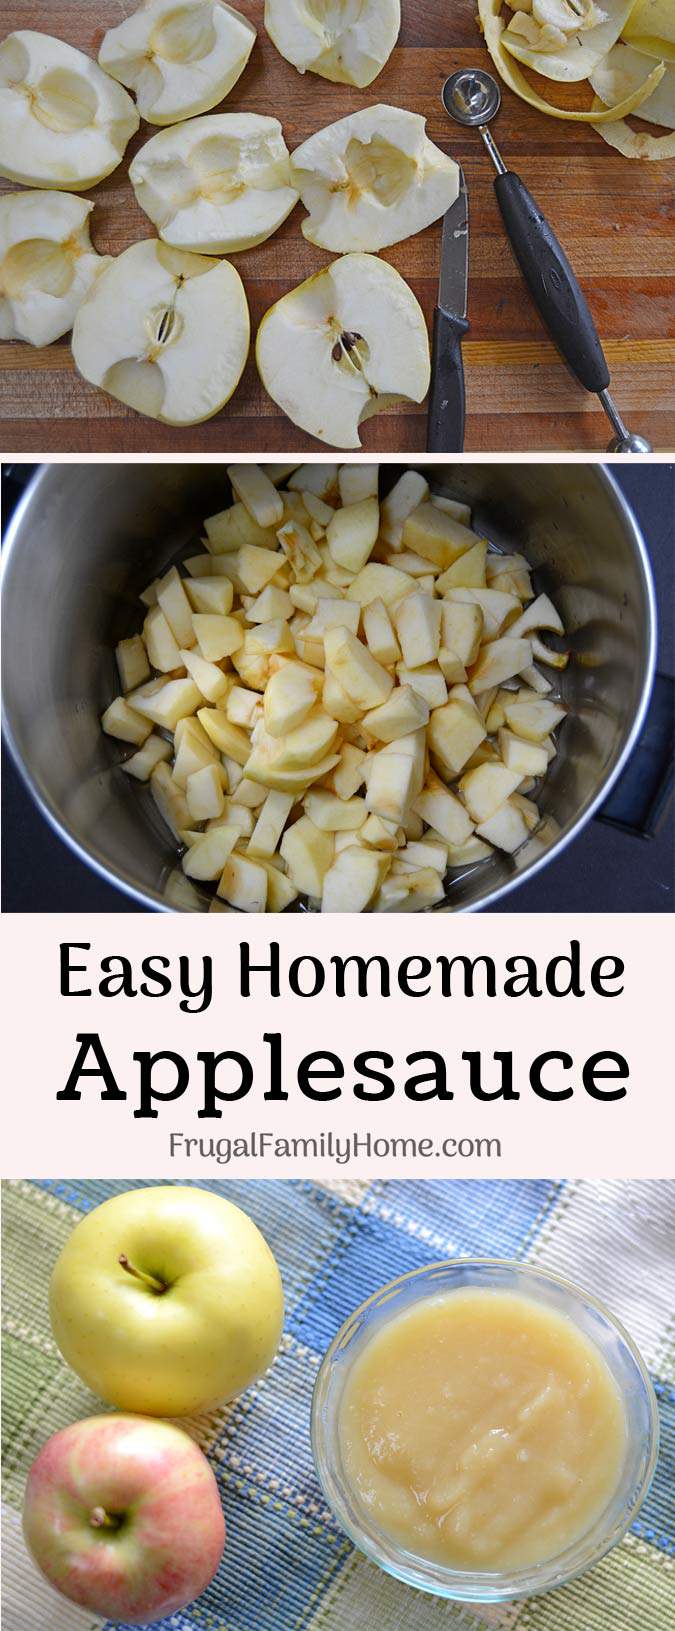 Two Ingredient Easy Homemade Applesauce Recipe- This homemade applesauce recipe is so easy to make with only two ingredients it’s healthy too. It’s prepared on the stovetop with no sugar added. We love this super simple applesauce recipe.